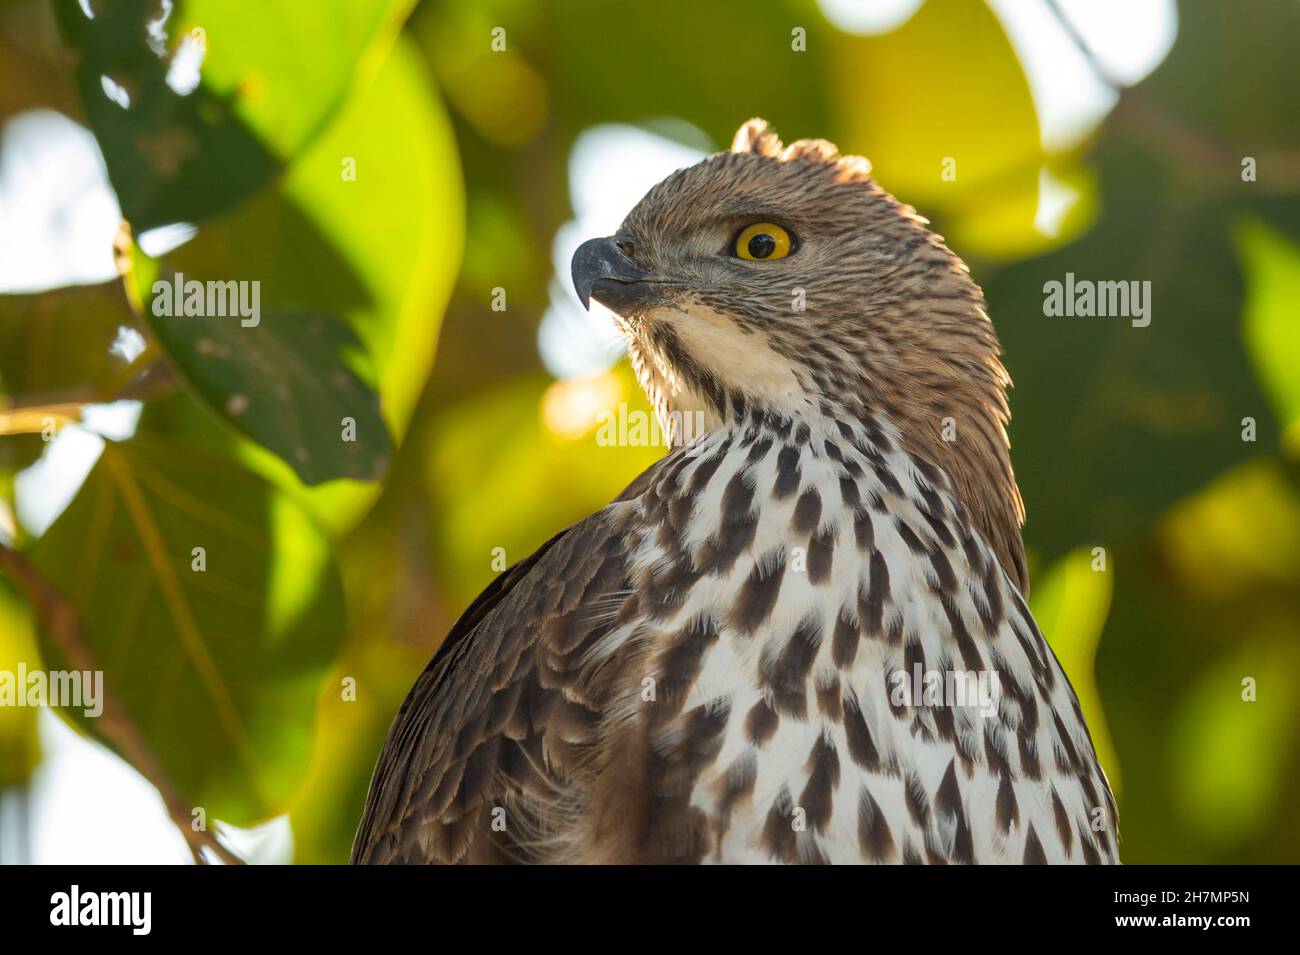 changeable or crested hawk eagle portrait perched on tree in natural green background at jim corbett national park or forest reserve uttarakhand india Stock Photo